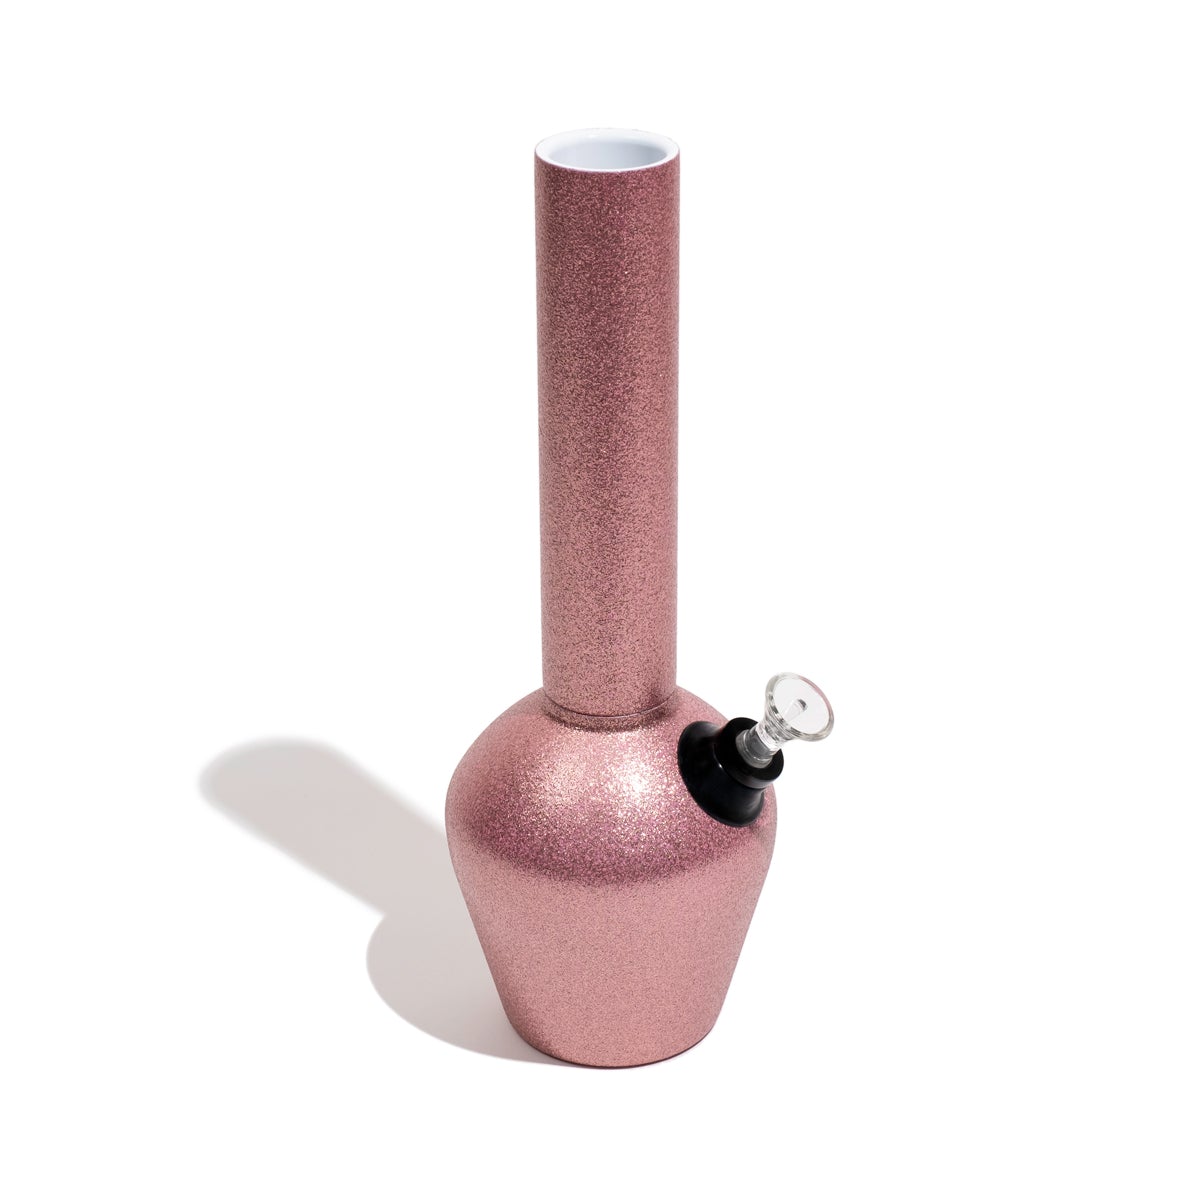 Chill Limited Edition - Pink Glitterbomb - INHALCO